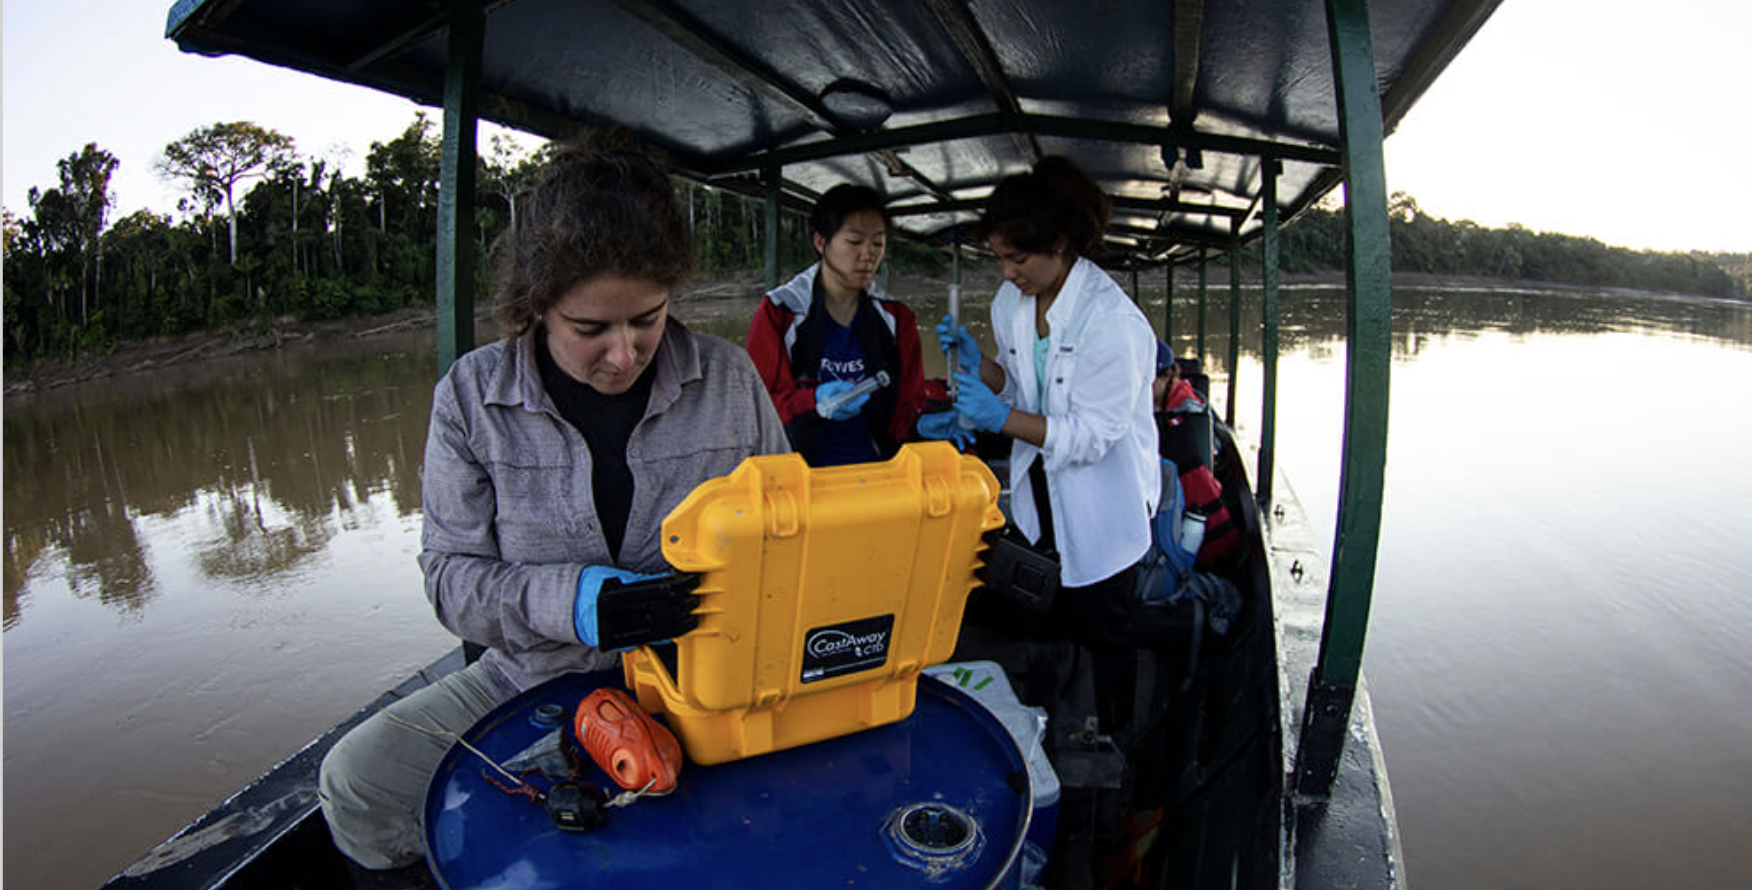 Jackie Gerson working with monitoring equipment on a boat